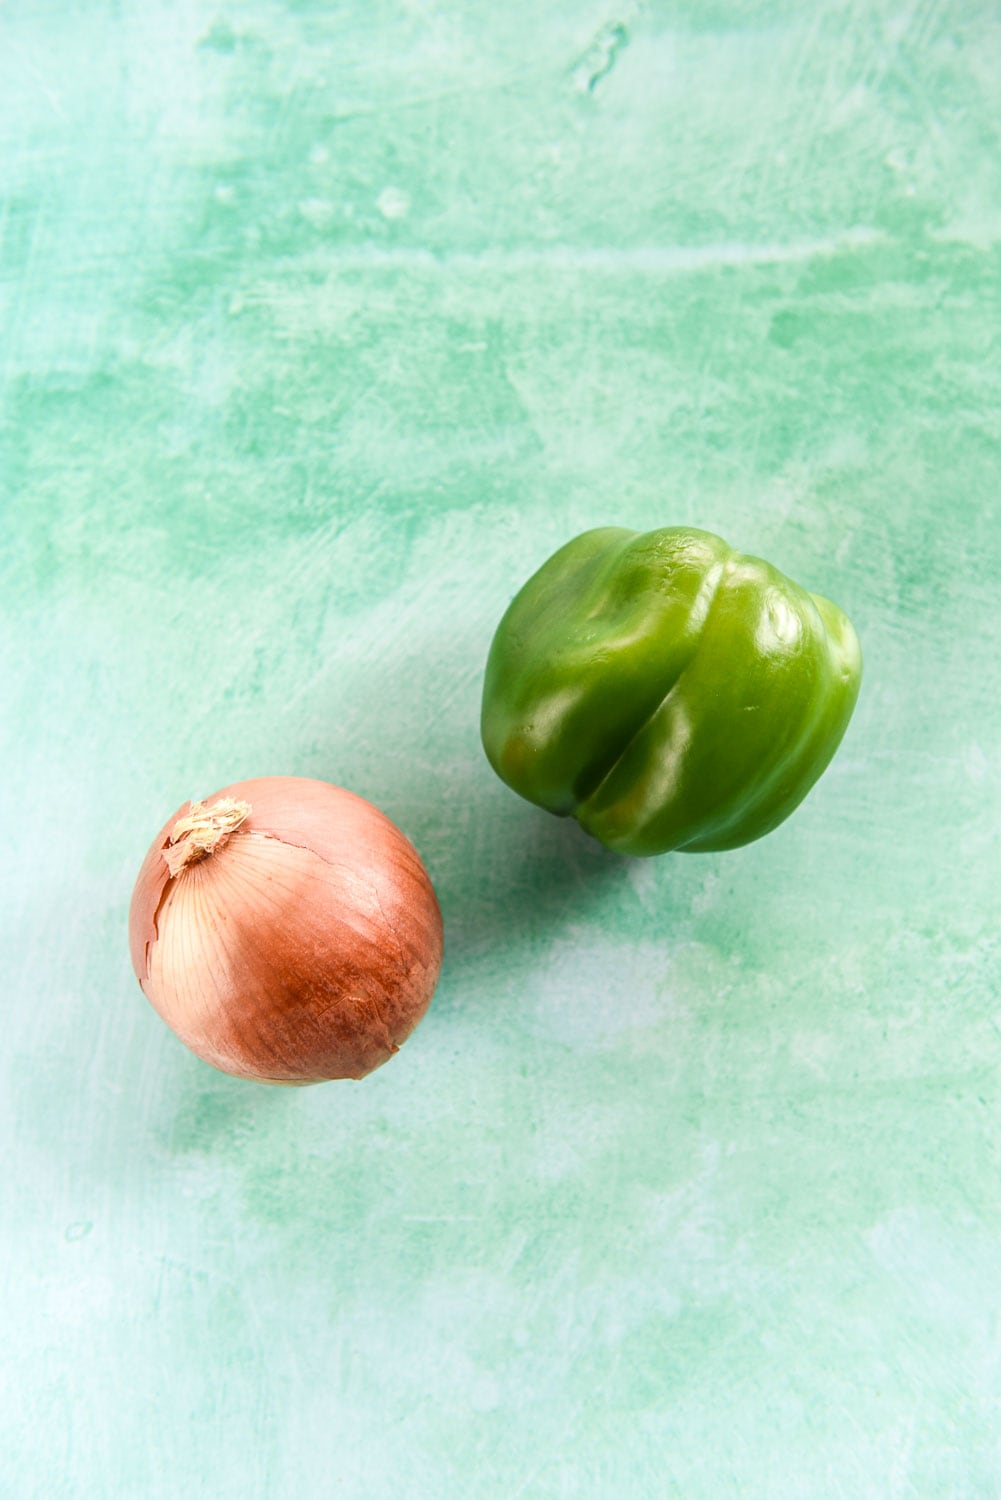 1 onion and 1 green pepper